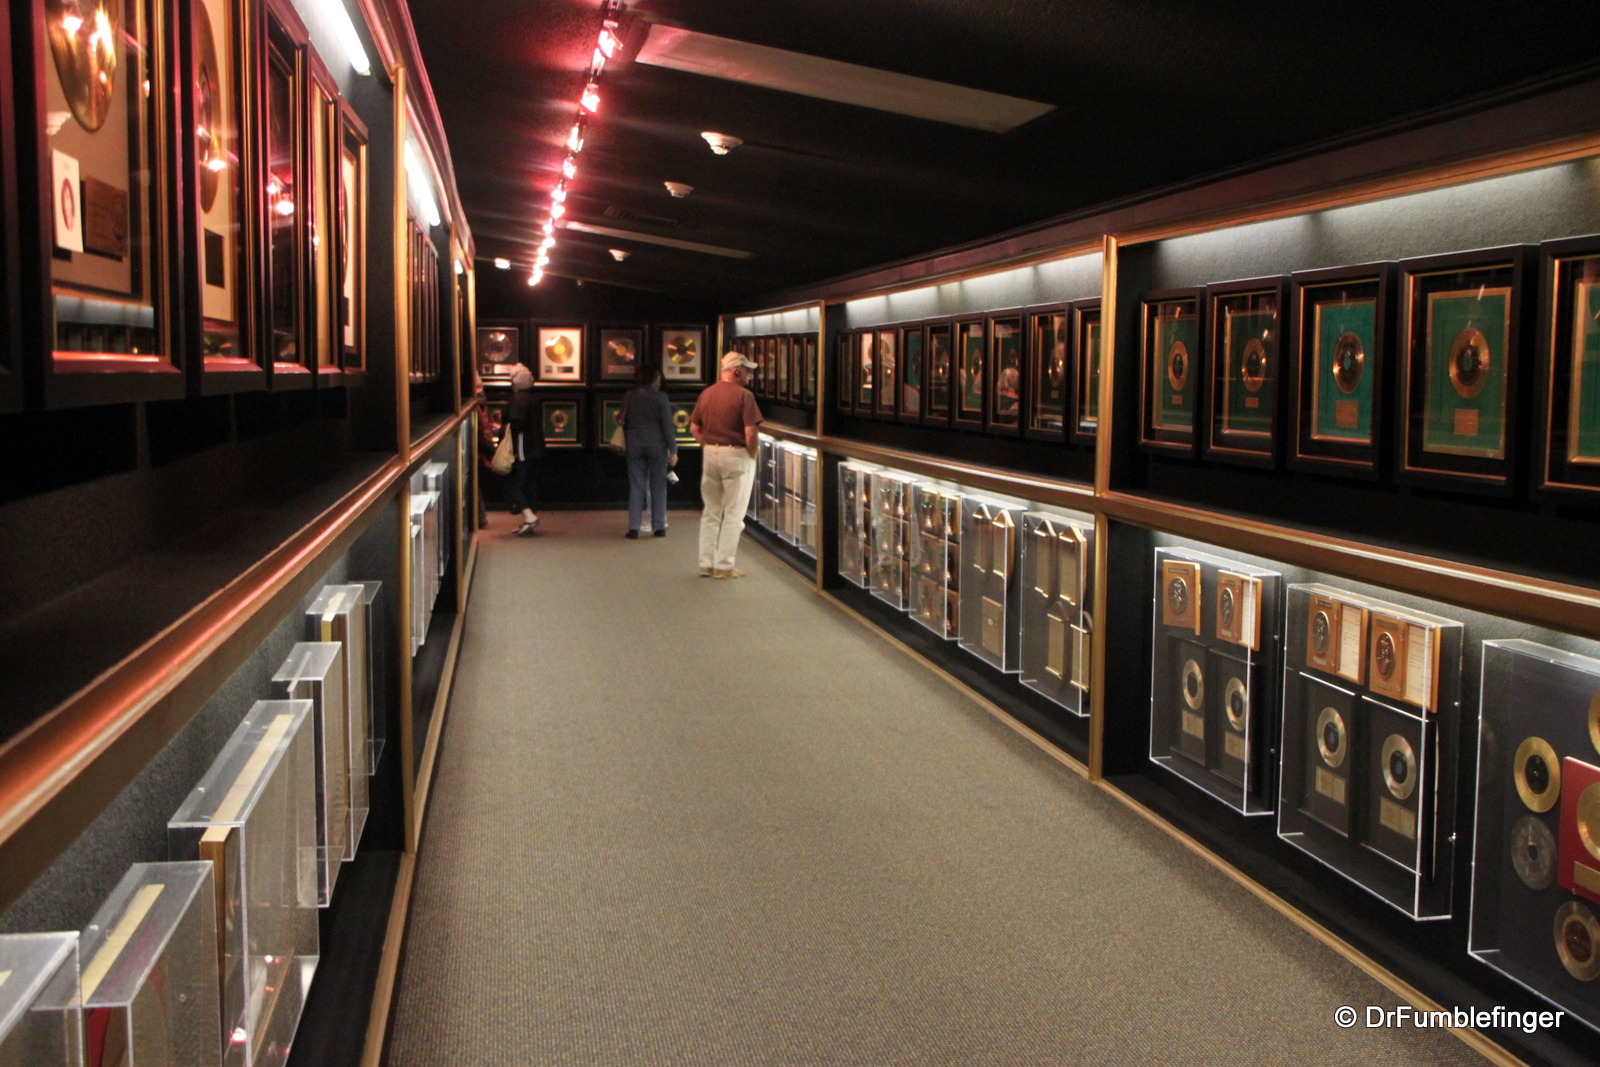 The "Hall of Gold", Graceland. Where all of the gold and plantinum records awarded were displayed by Elvis during his lifetime